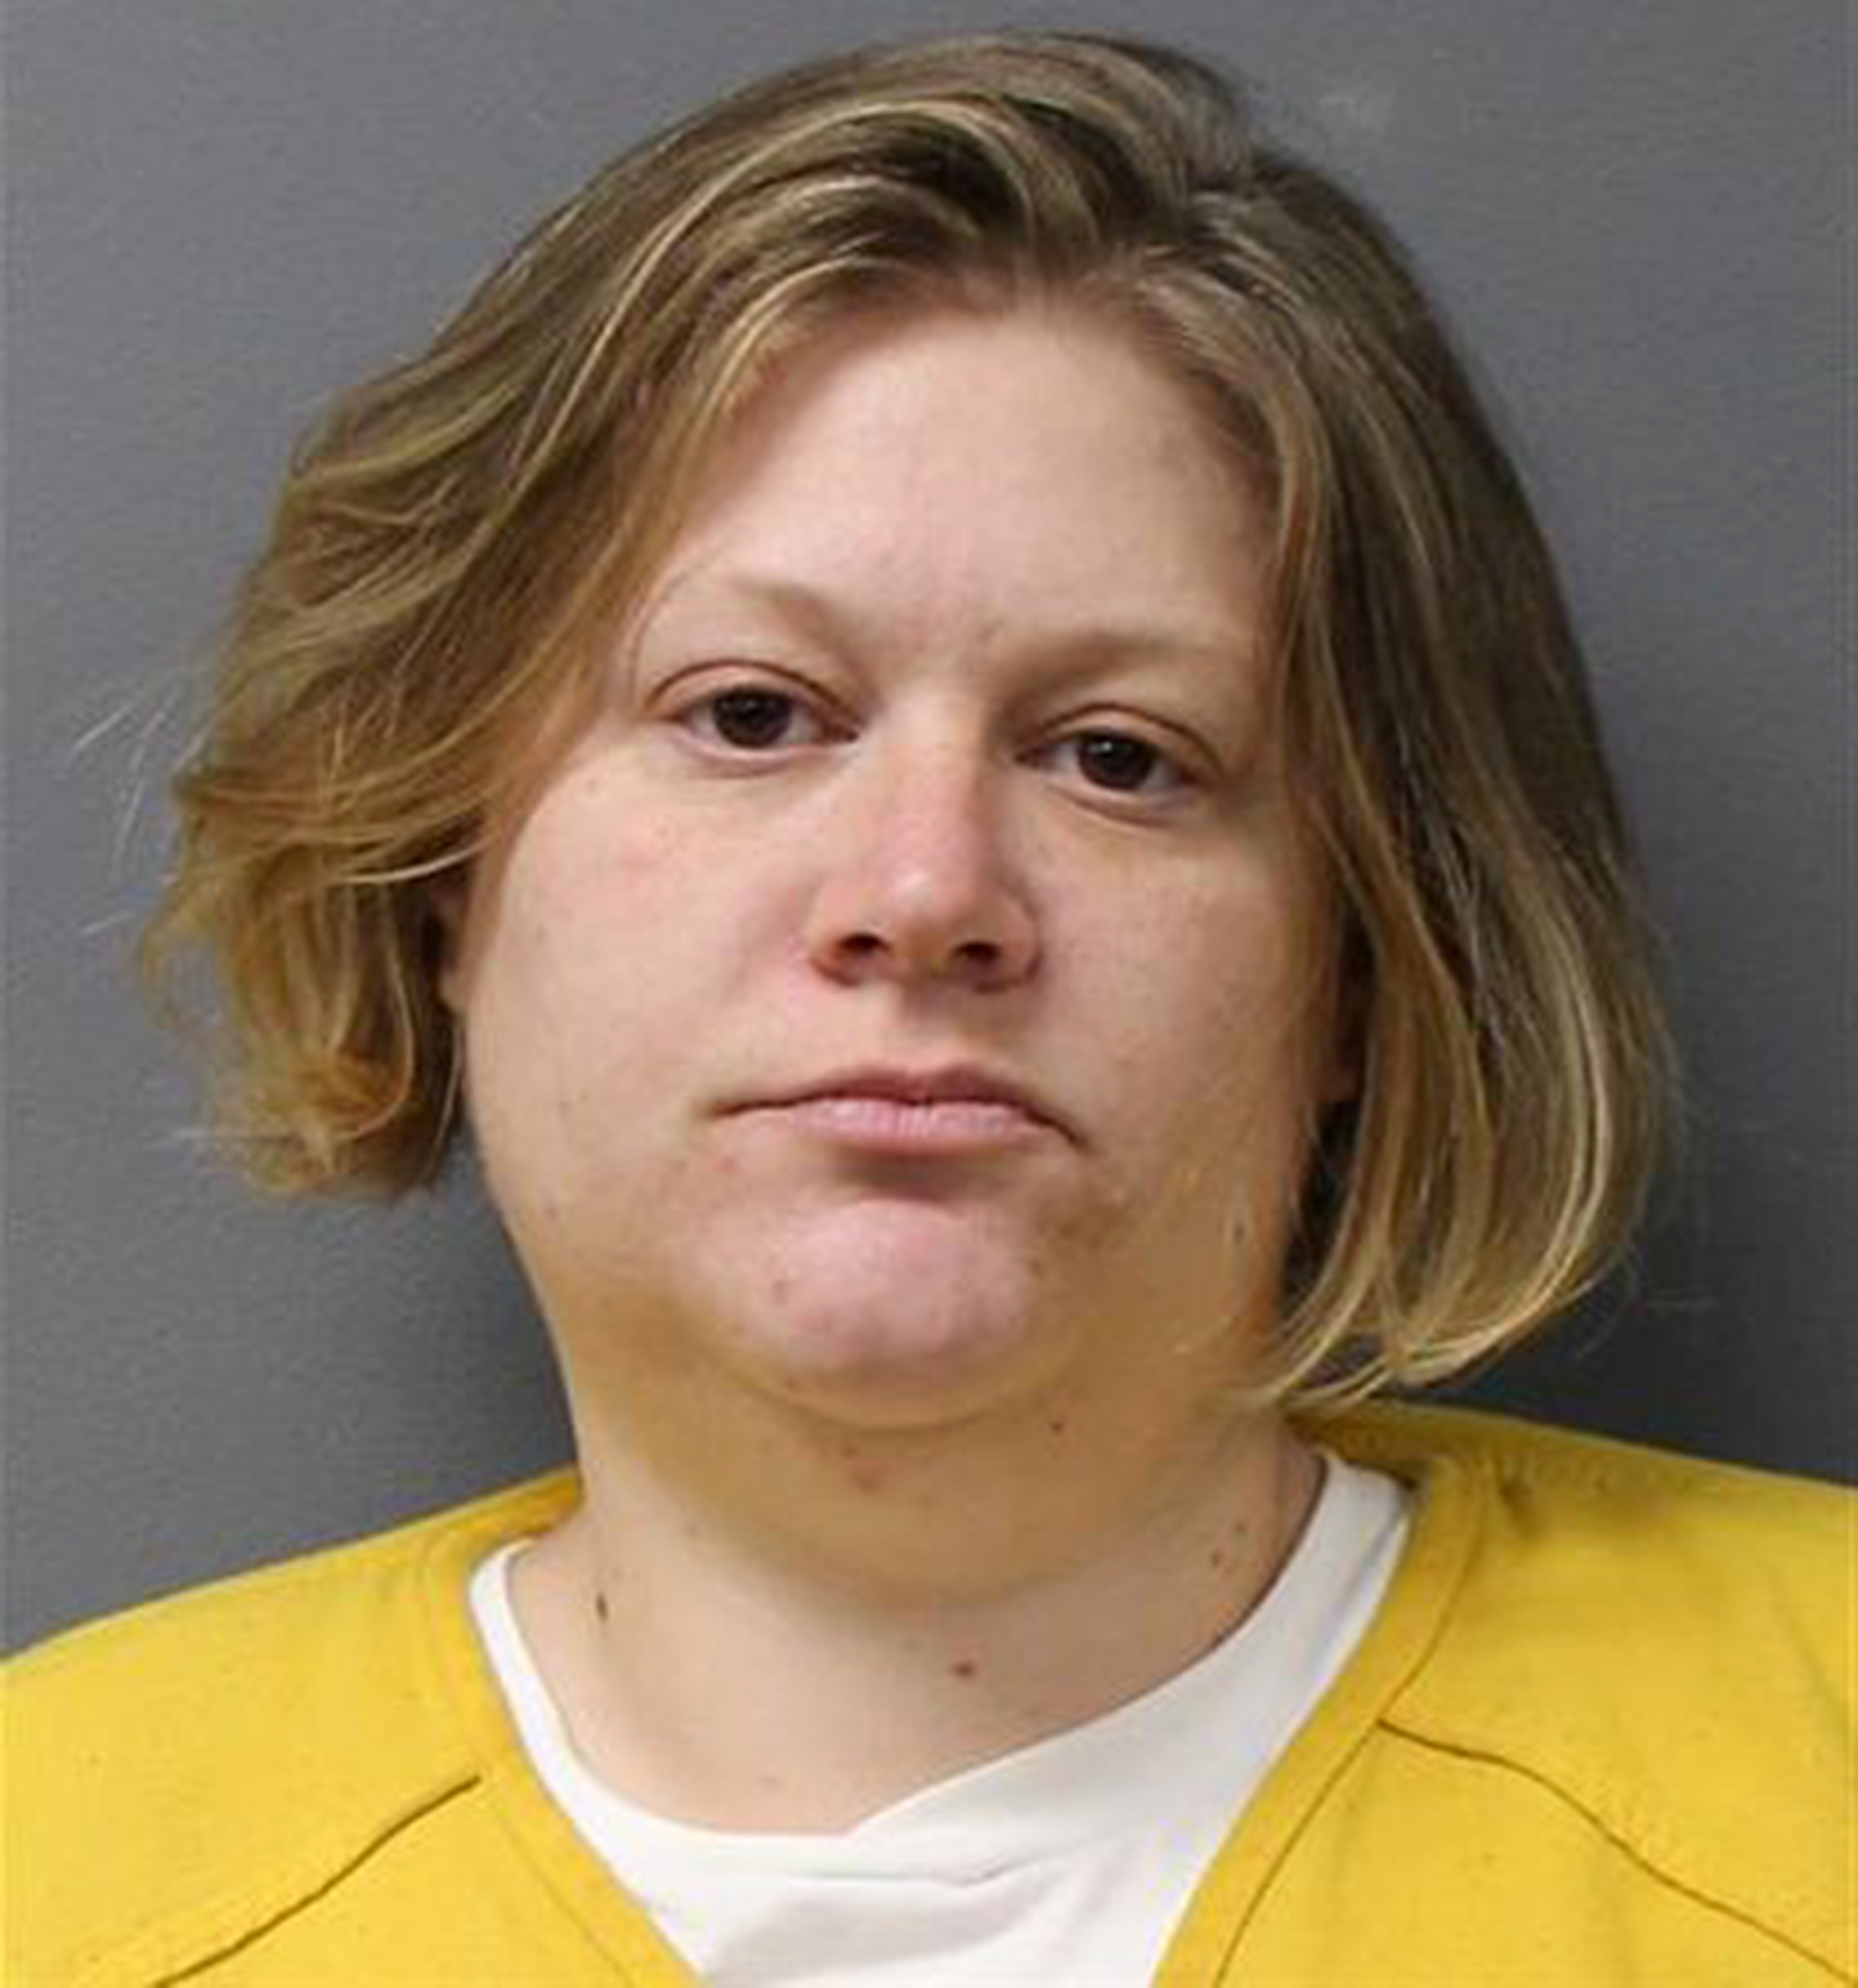 Lisa Rachelle Snyder Mom Charged With 2 Counts of Murder After Telling Police Her Son Hung Himself and His Sister